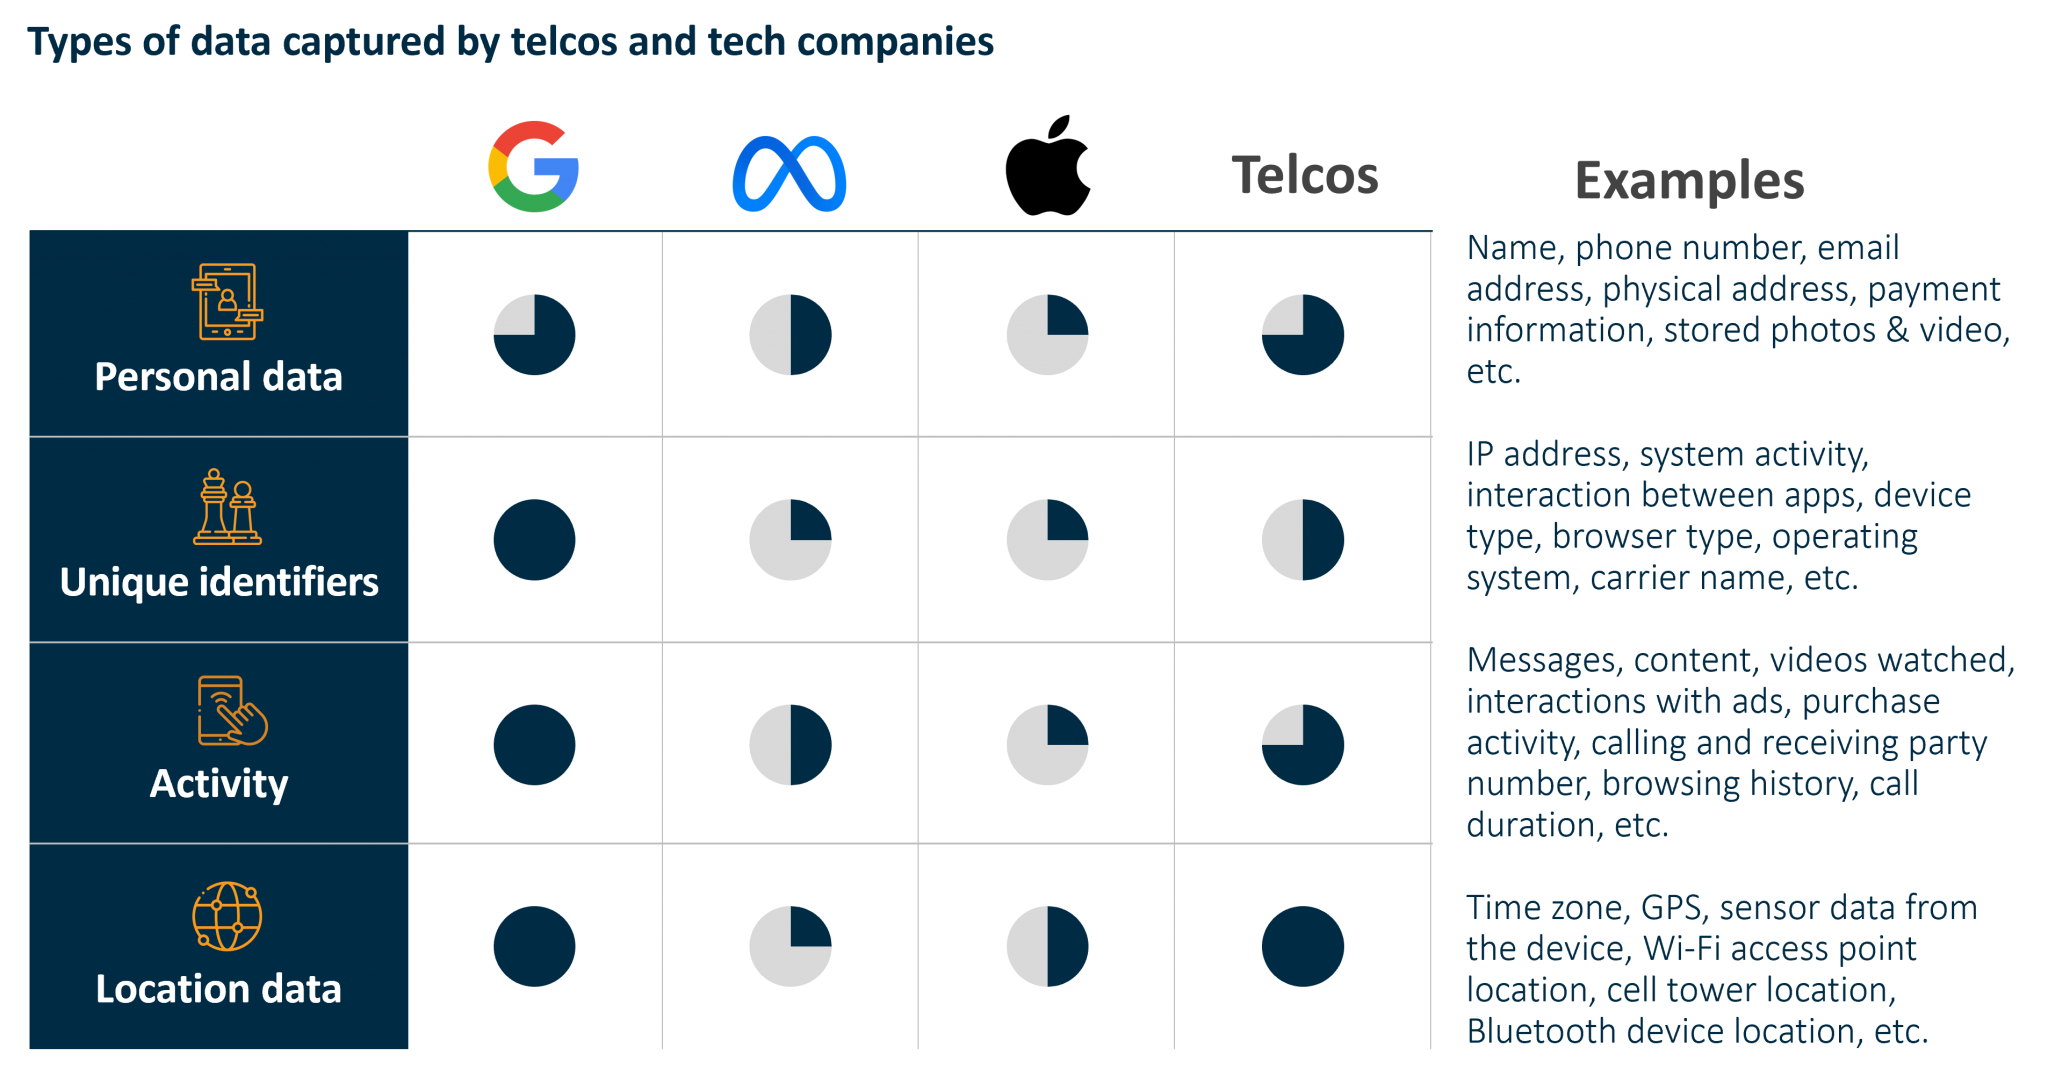 Types of data captured by telcos and tech companies